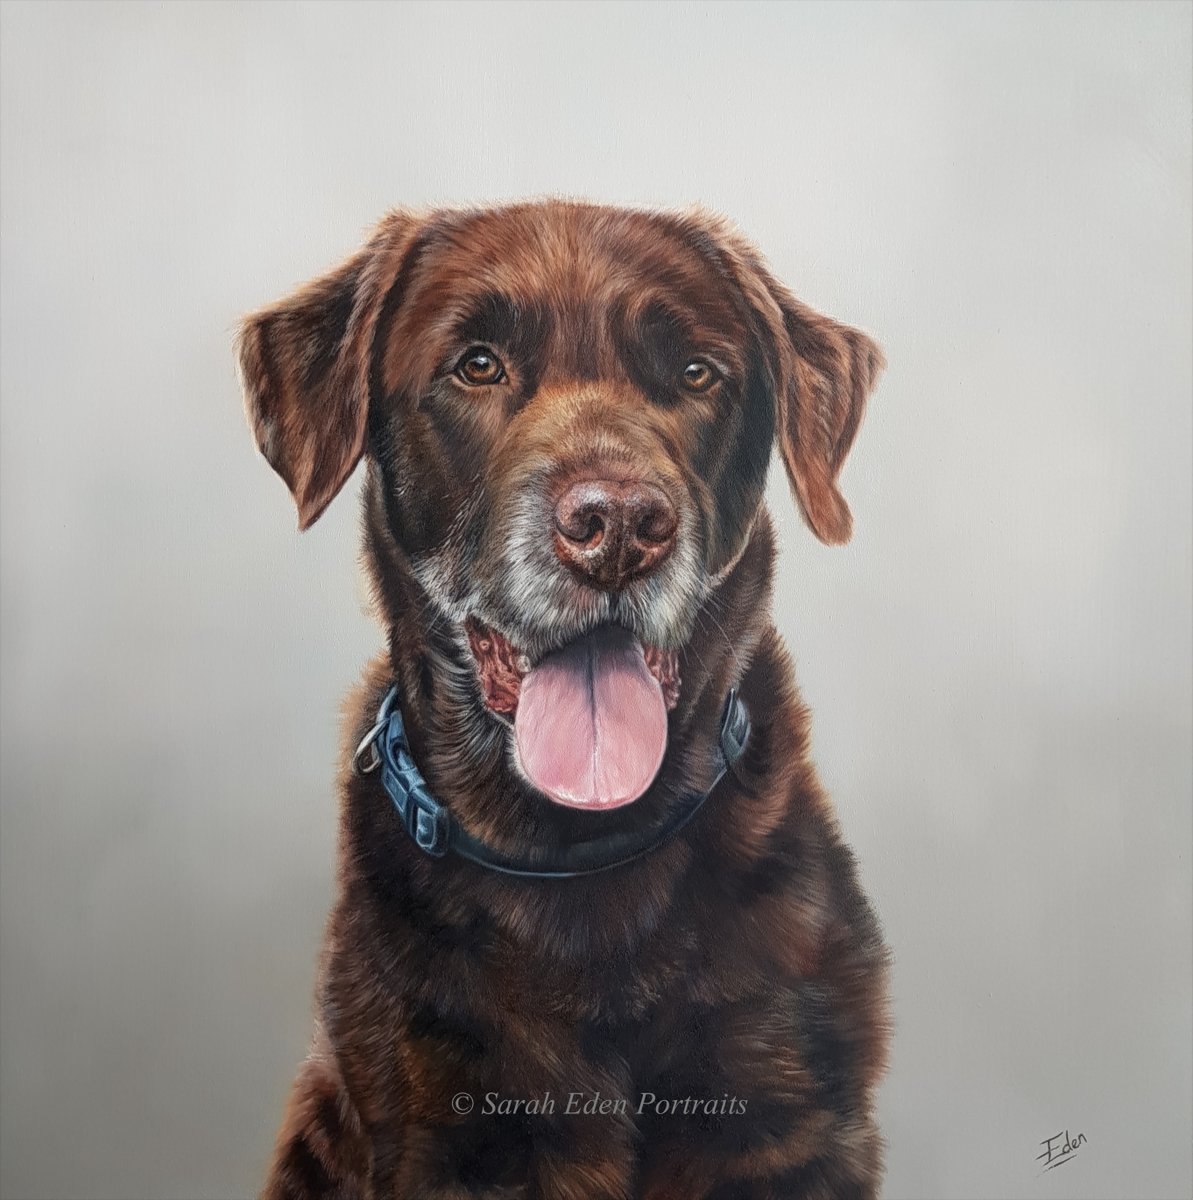 My latest commission is all finished :-) Oil on board 16 x 16'

#chocolatelabrador #labrador #labradors #labradorportrait #dogportrait #animalartist #dogpainting #christmasgift #custompainting